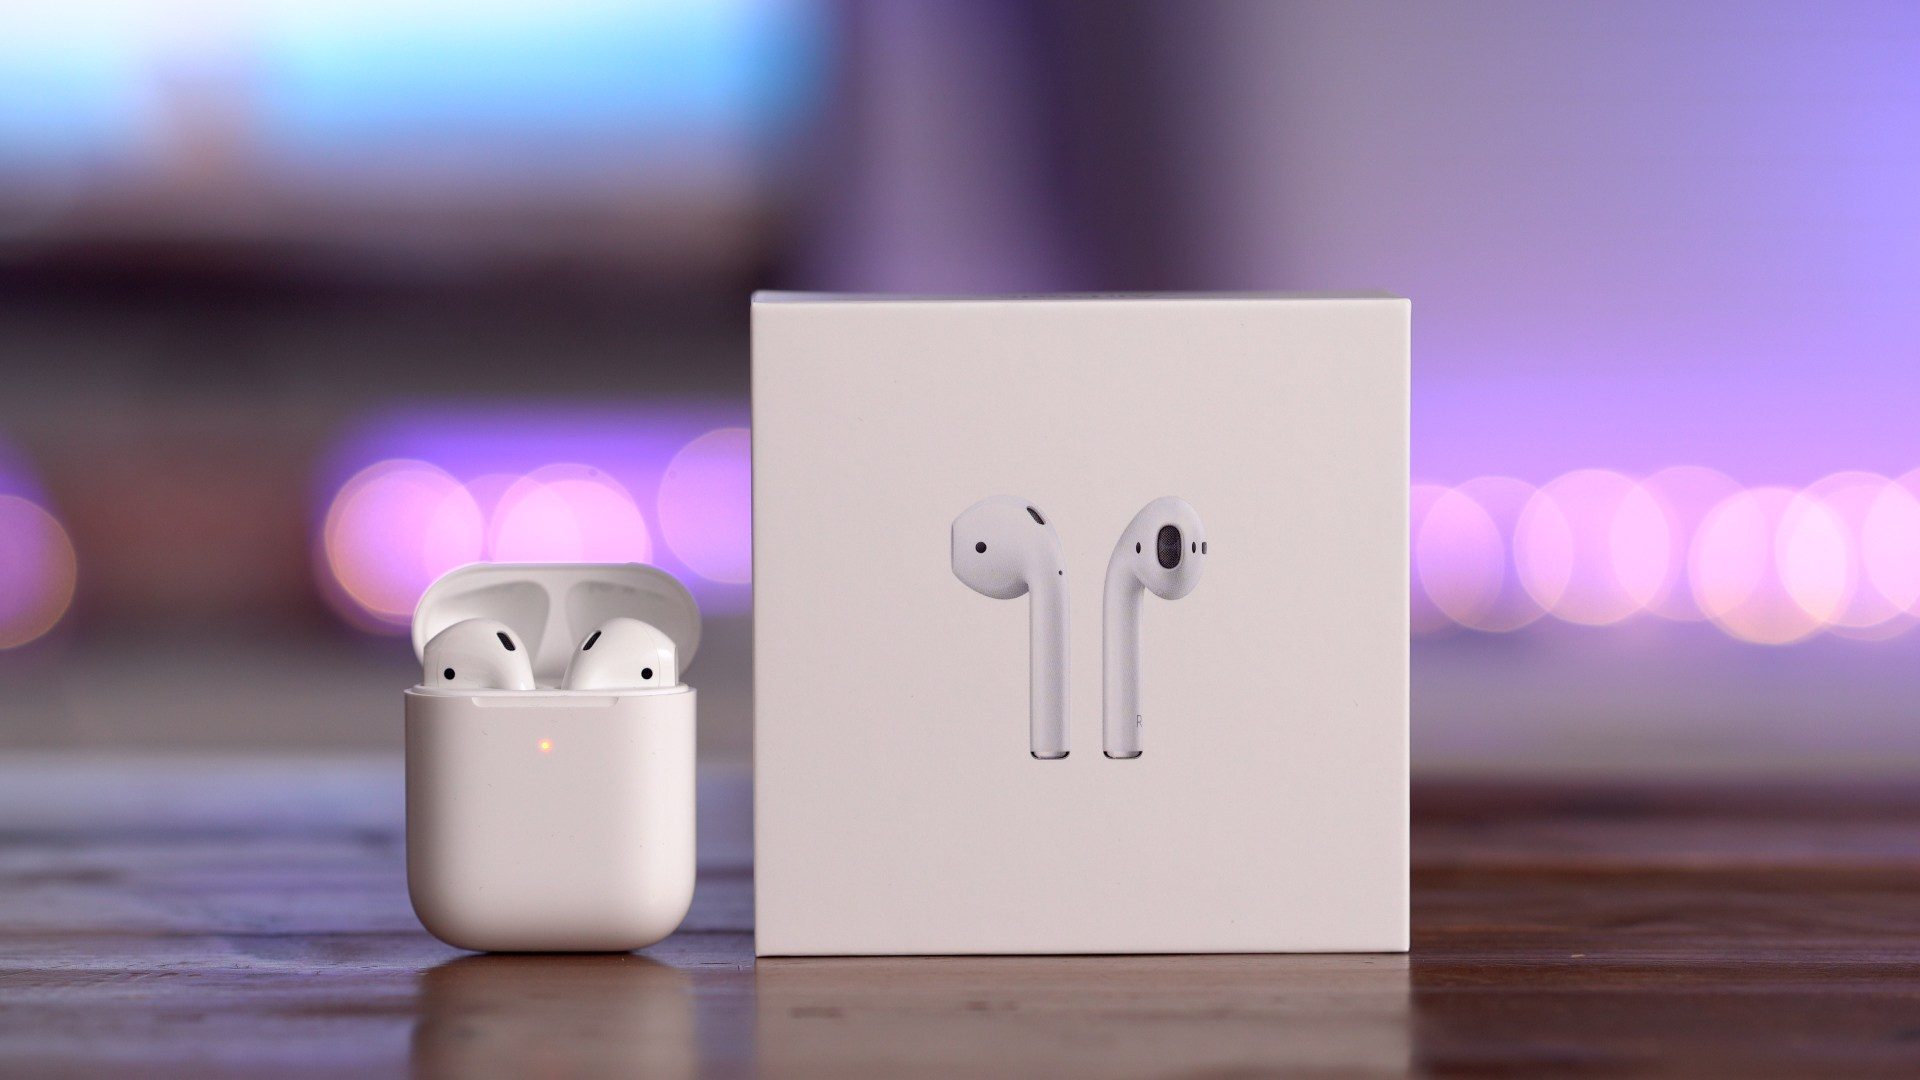 Apple's new AirPods see first price drop from $140 - 9to5Toys